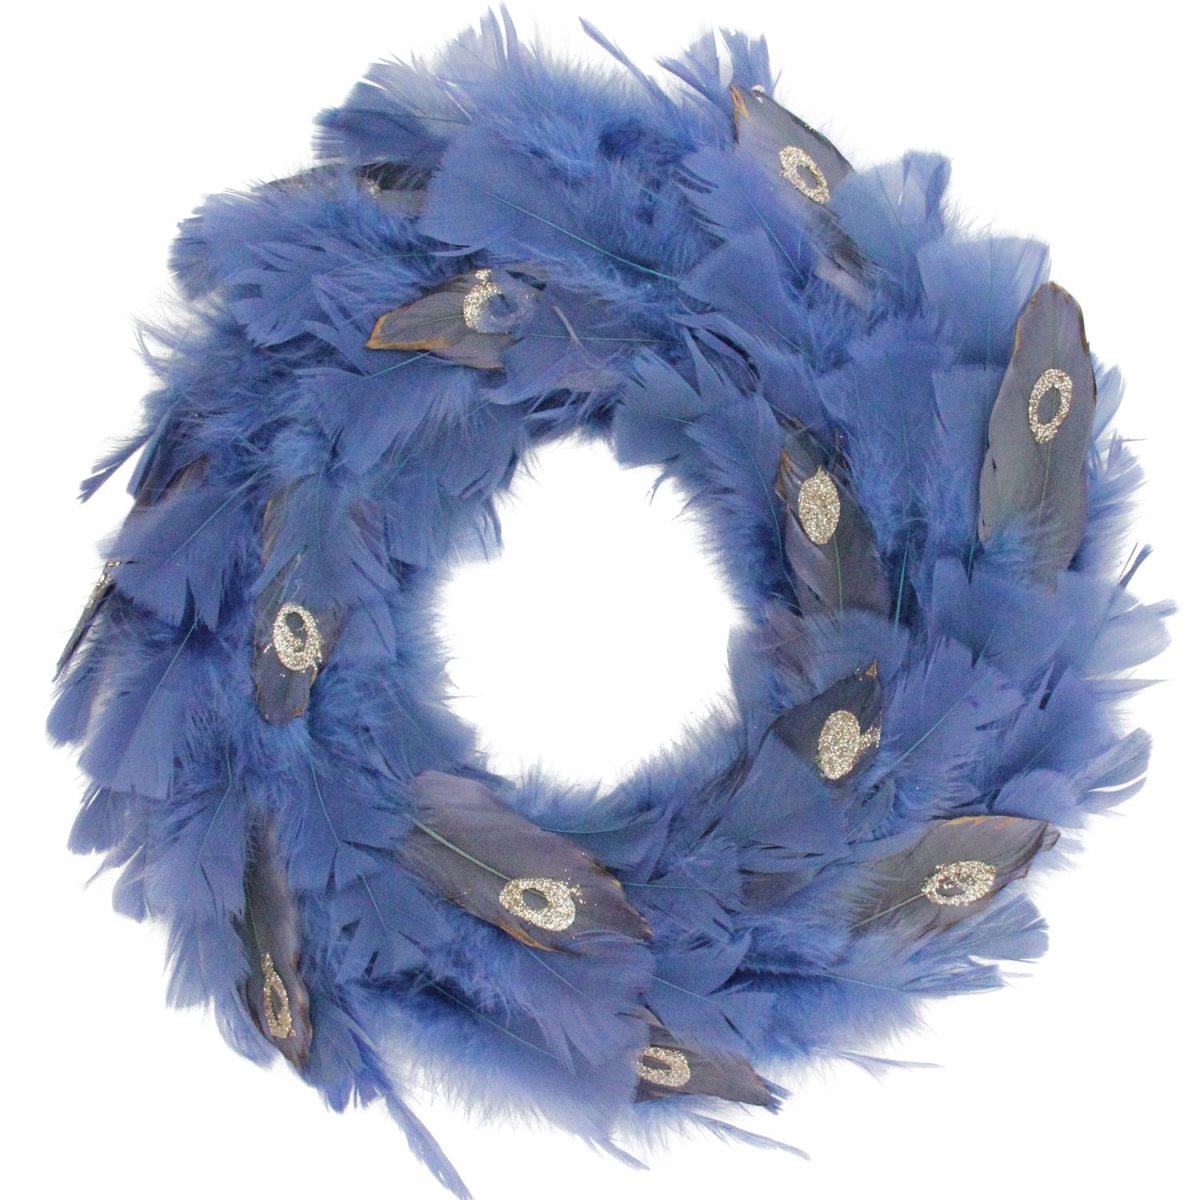 32638313 14 In. Regal Peacock Embellished Blue Feather Artificial Christmas Wreath - Unlit